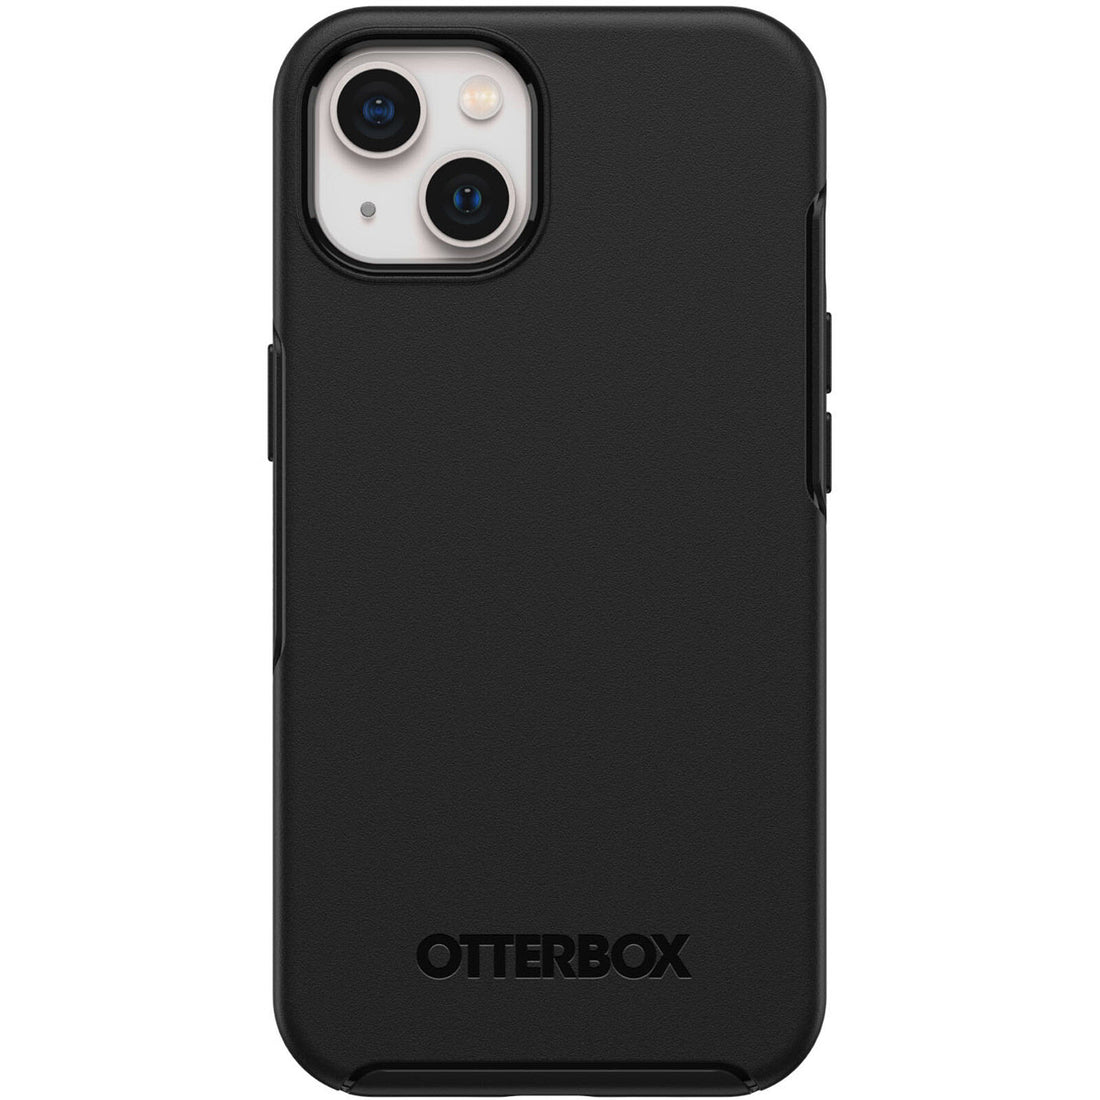 OtterBox SYMMETRY SERIES Case for Apple iPhone 13 - Black (Certified Refurbished)